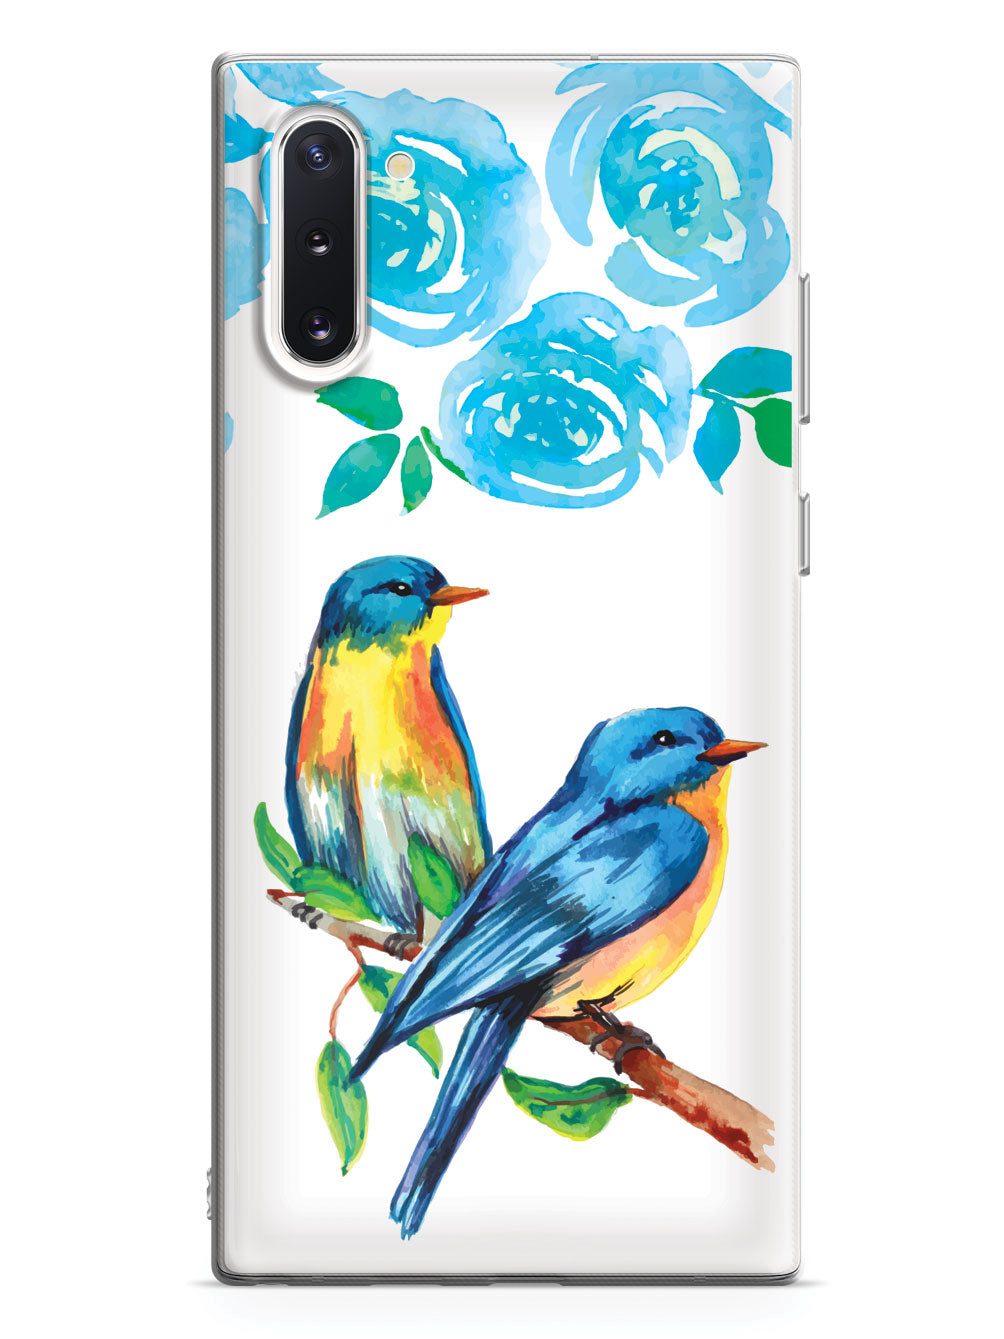 Bluebirds and Flowers Case